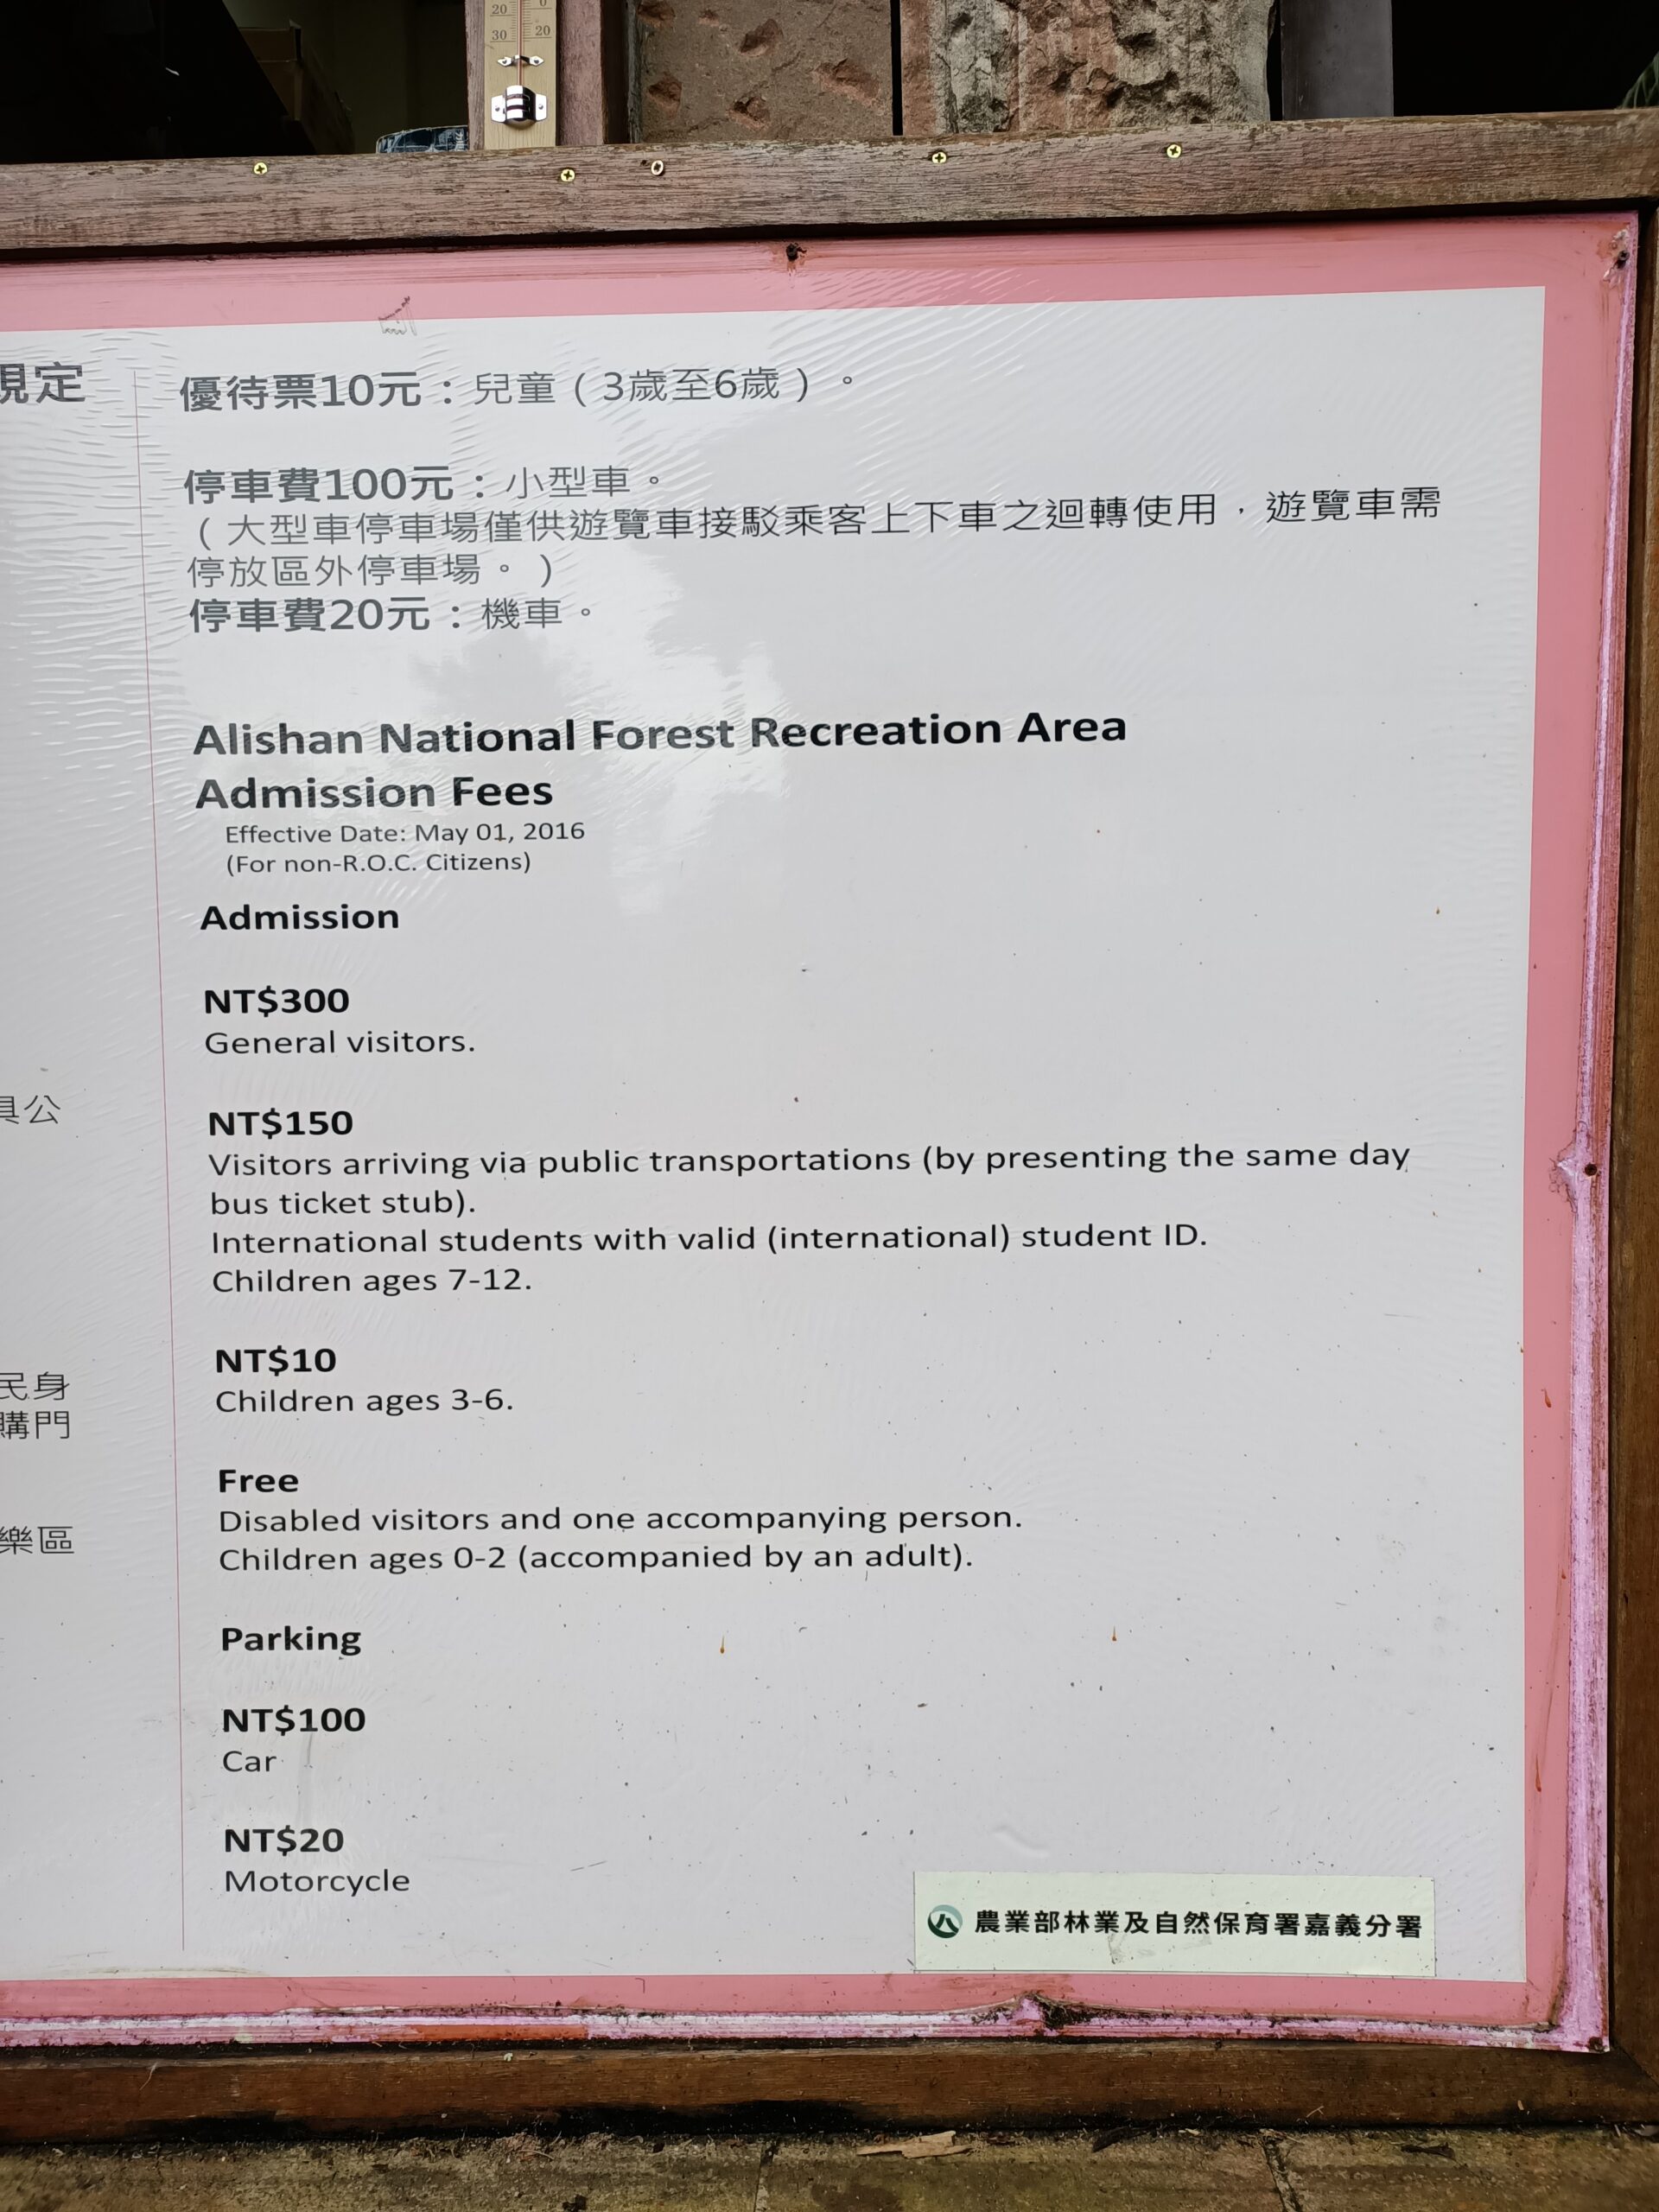 Alishan National Forest Recreation Area Admission Fees Board